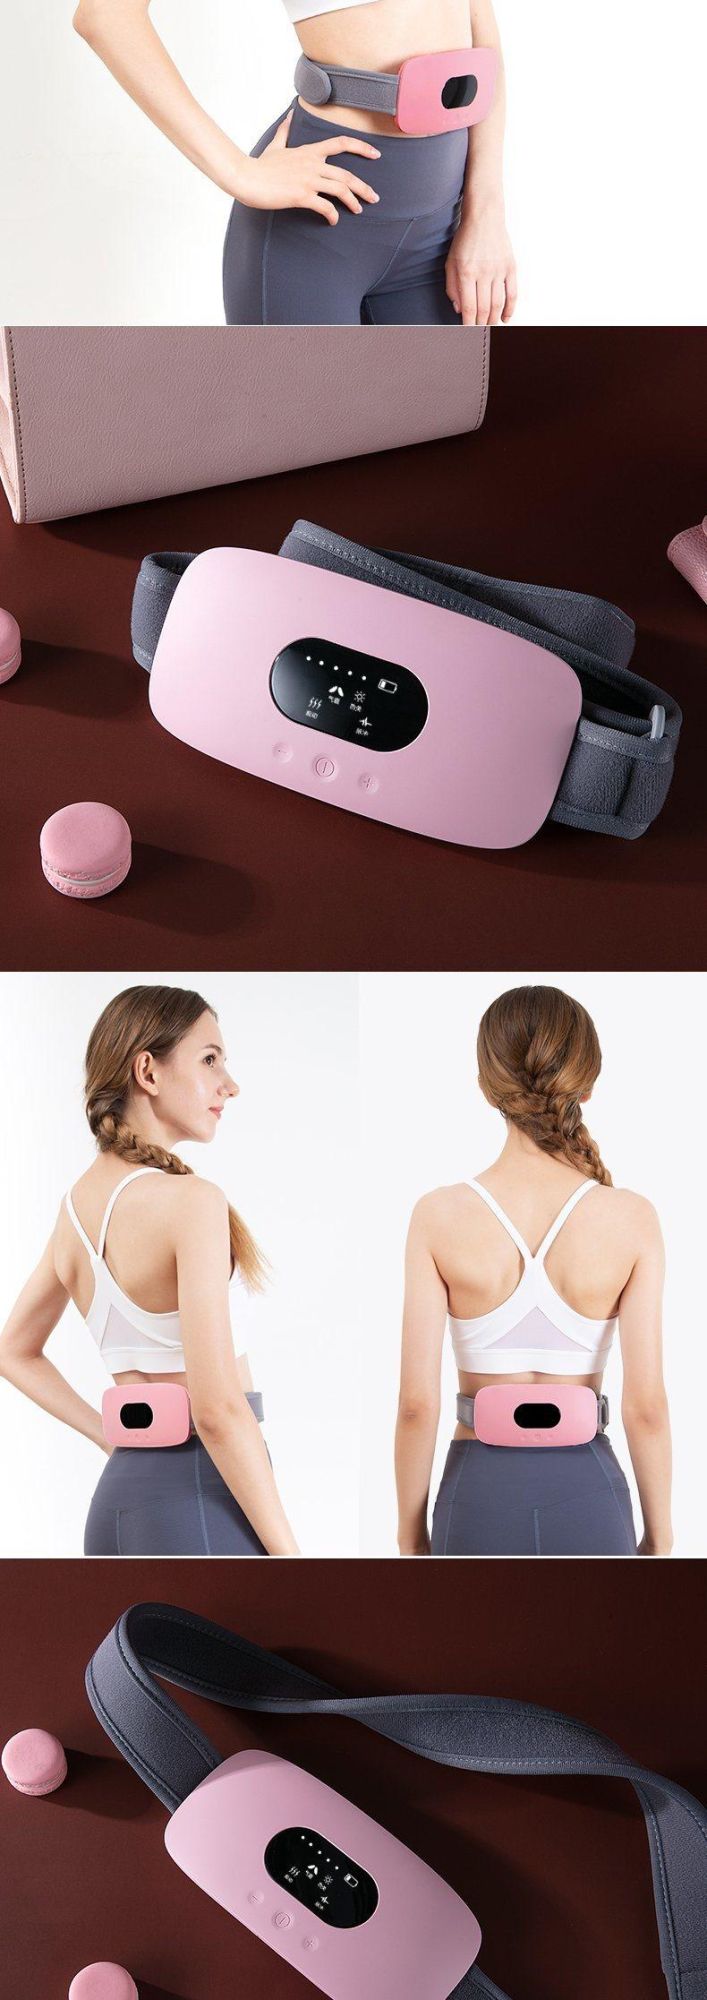 Hezheng High Quality Electronic Heat Vibration Slimming Losing Weight Keeping Fit Body Massager Belt